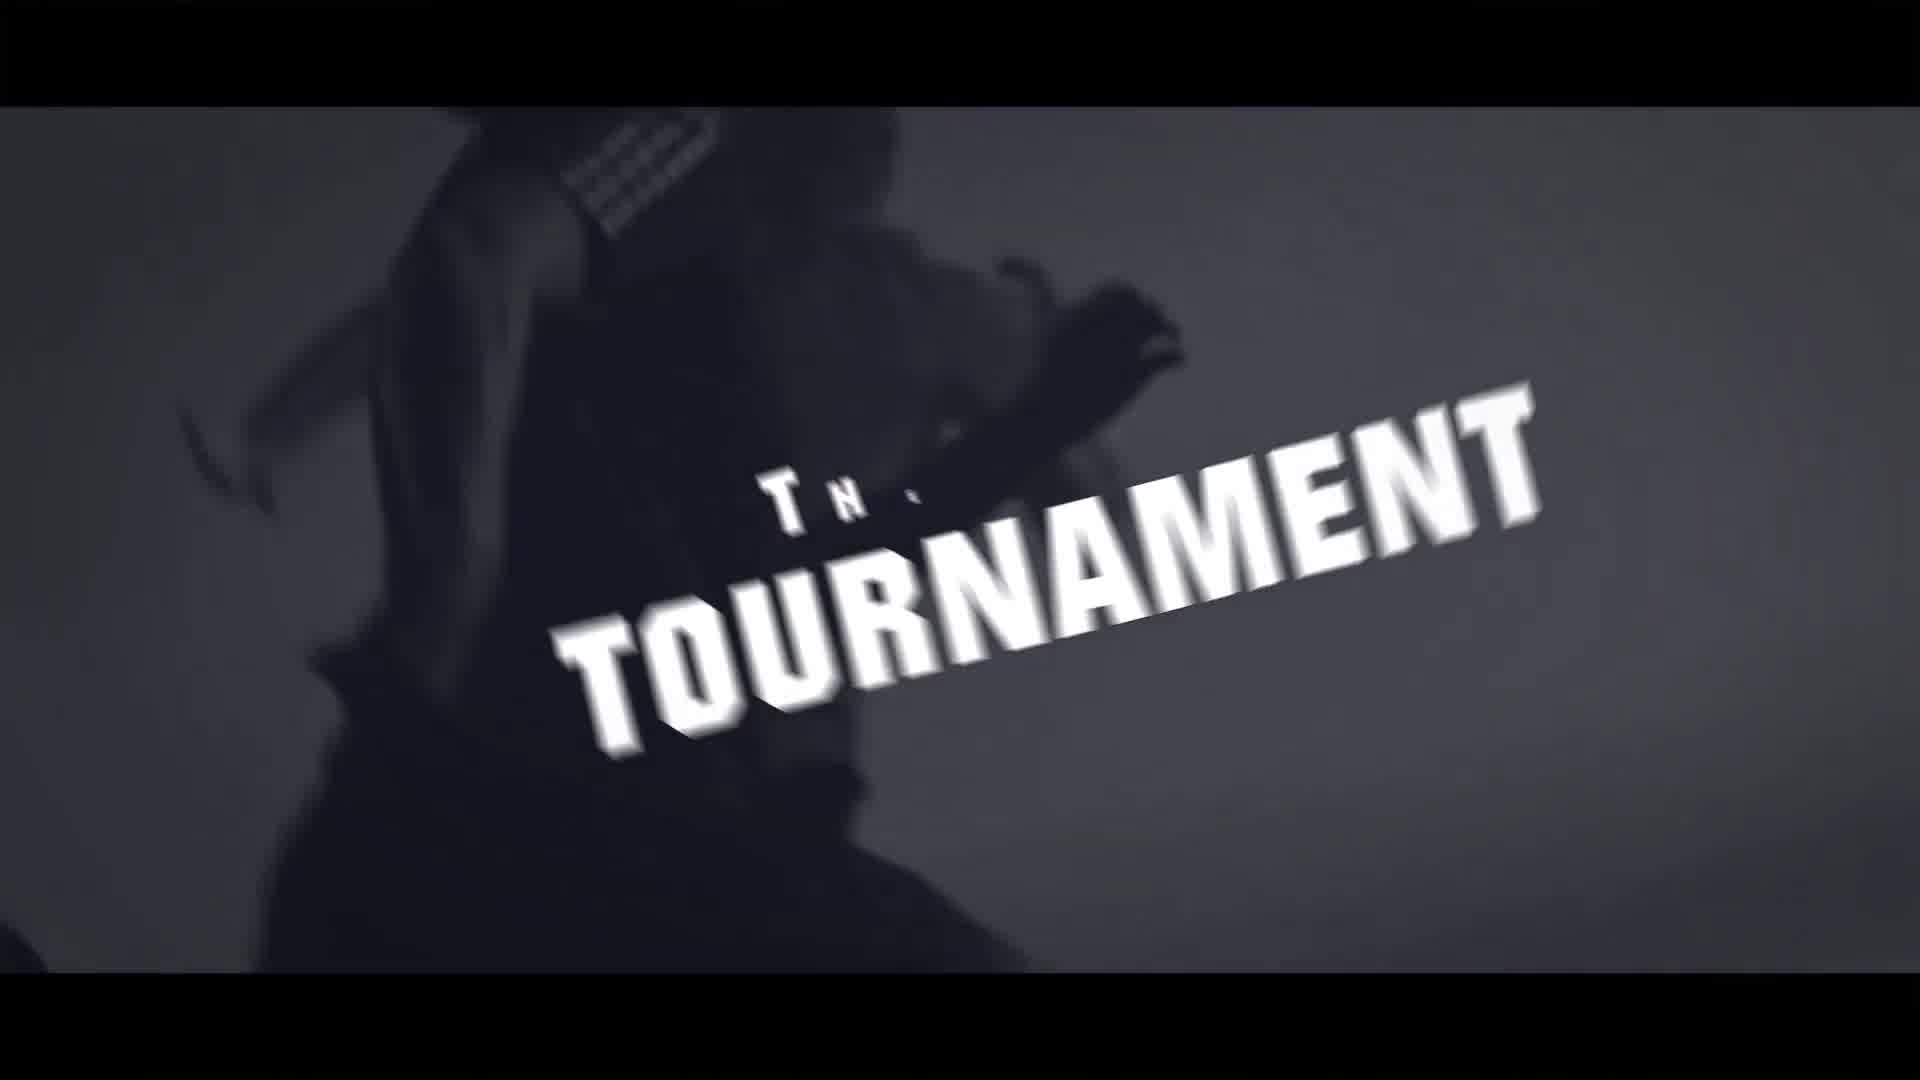 sport-tournament-download-fast-23653977-videohive-after-effects